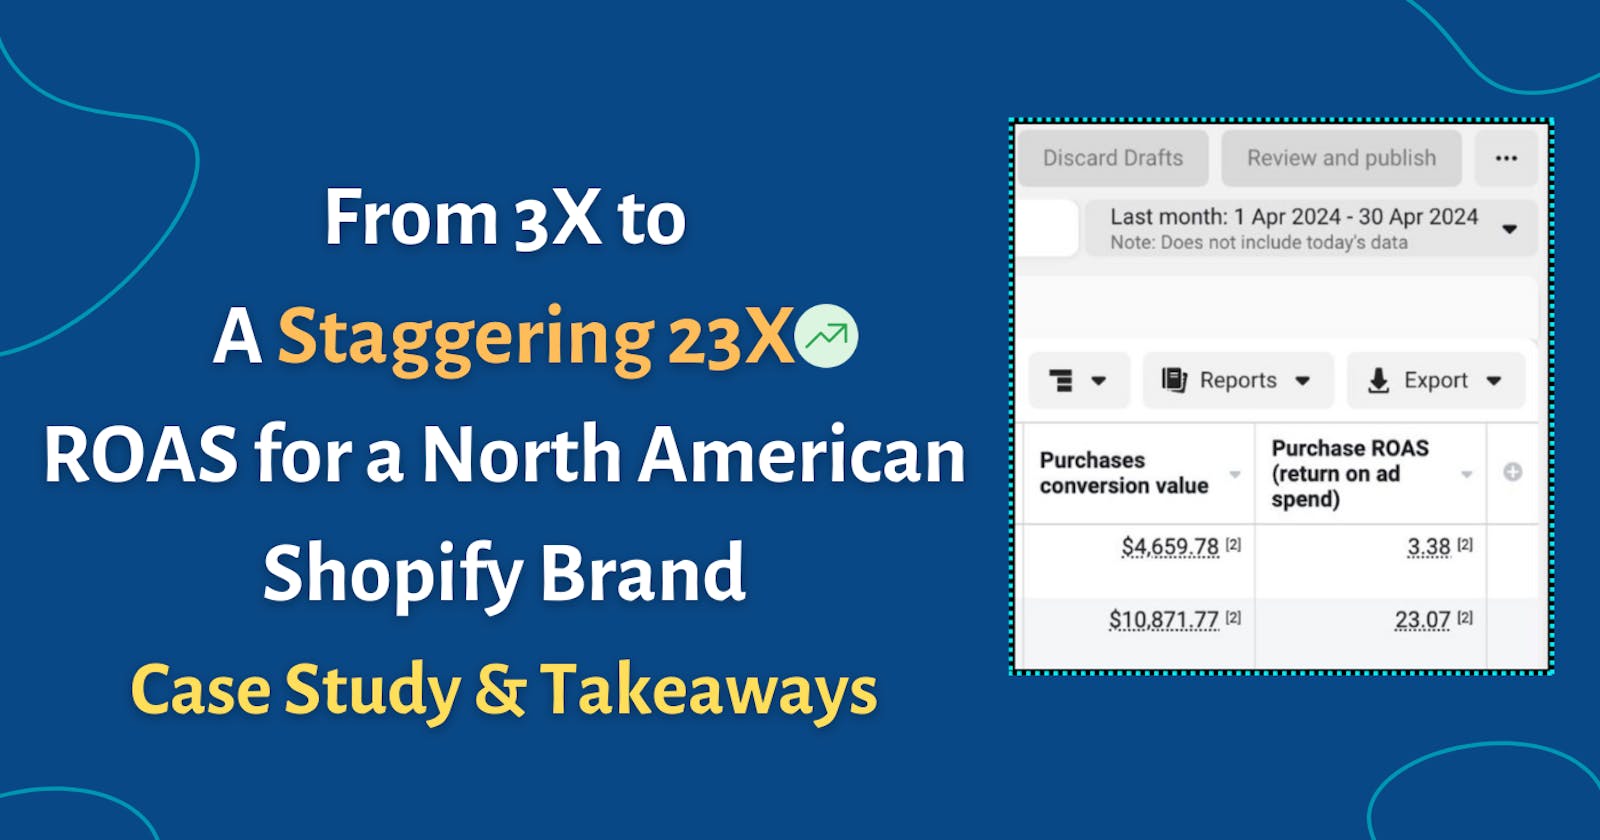 How I Increased ROAS from 3X to 23X for a North American Shopify brand [Case Study]